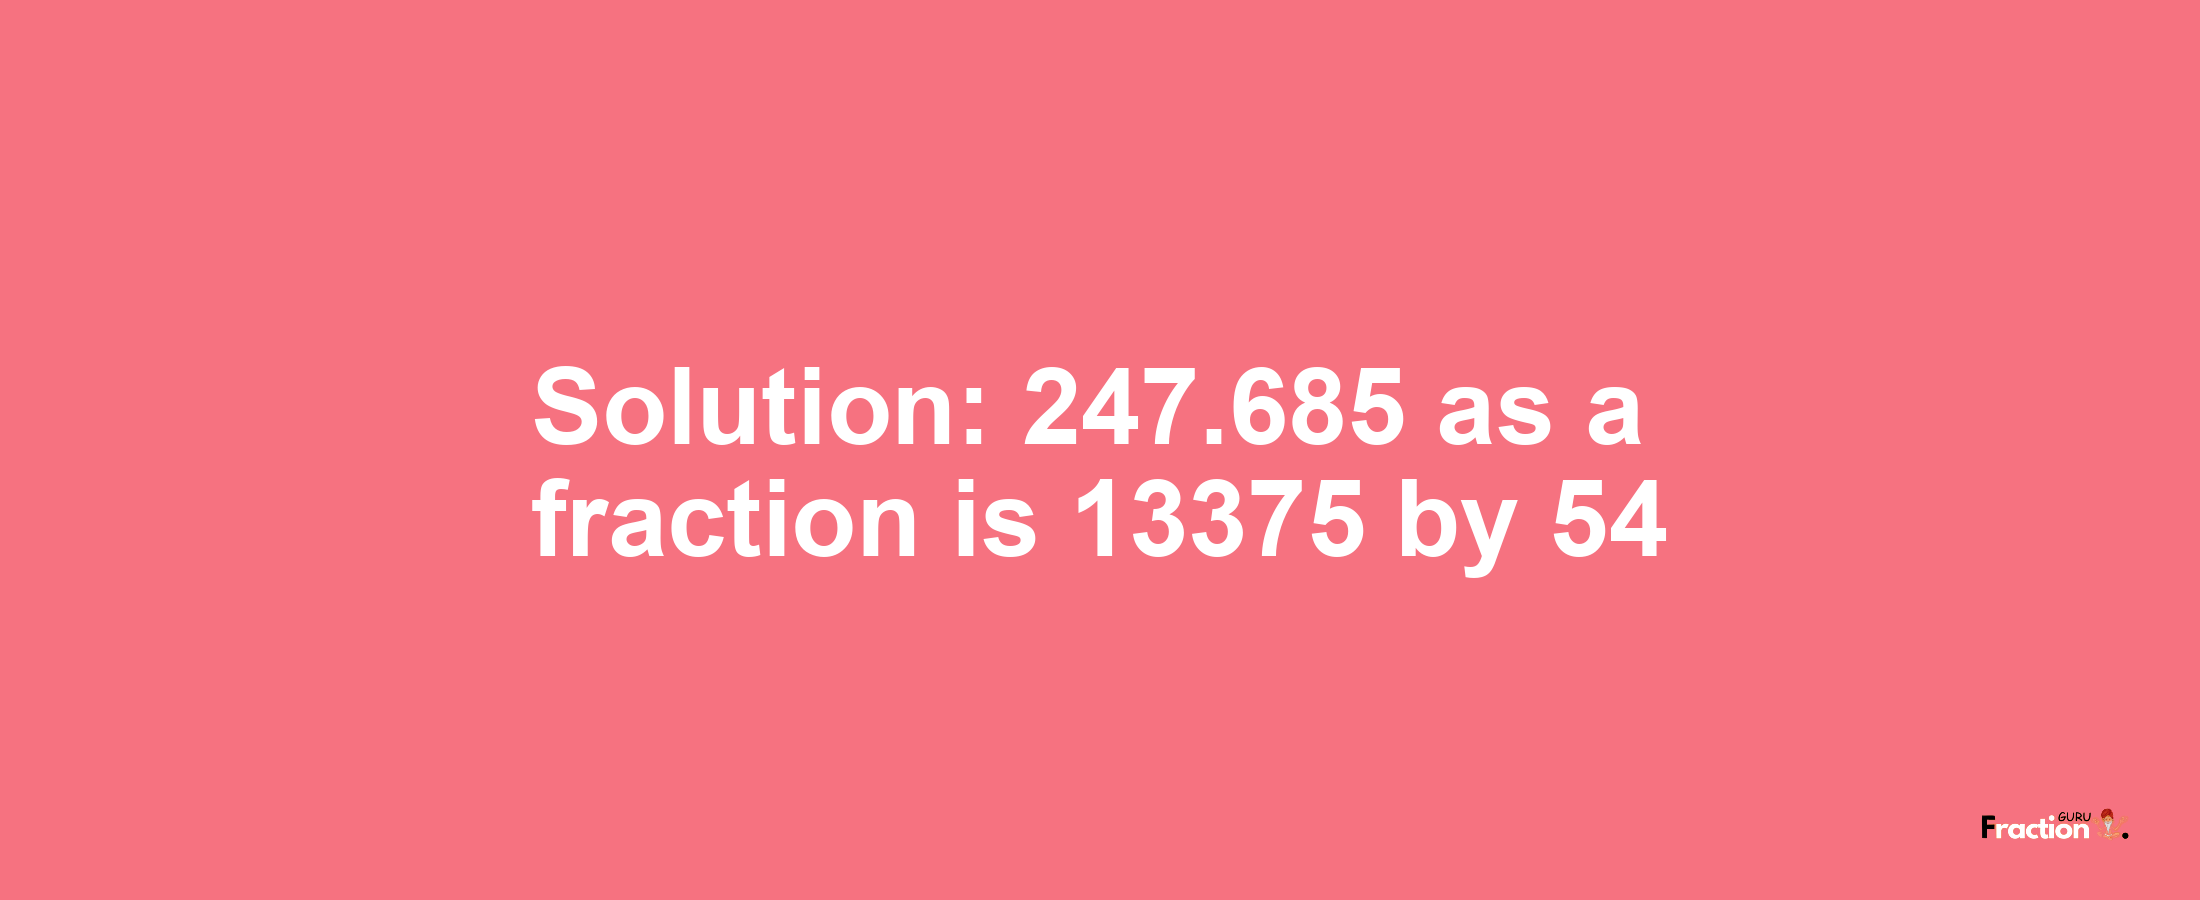 Solution:247.685 as a fraction is 13375/54